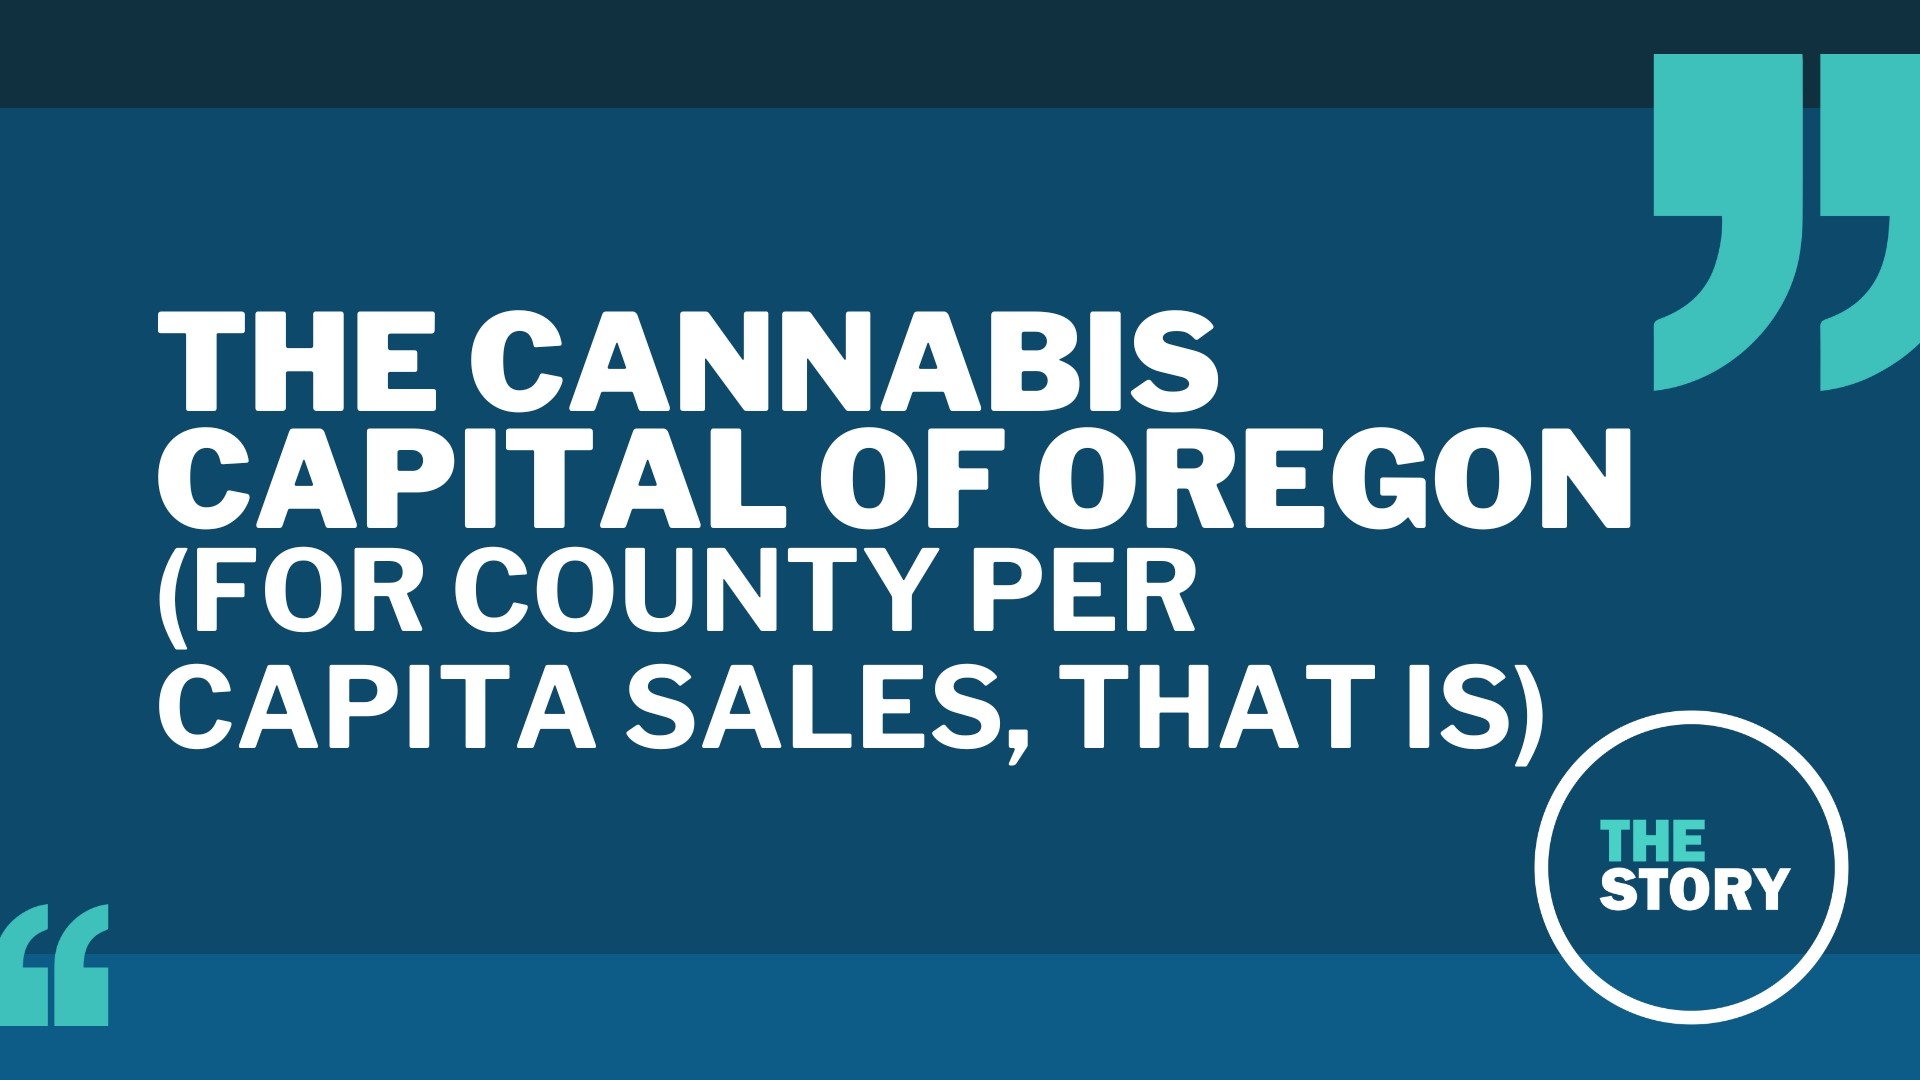 The per capita cannabis sales leader isn’t urban Multnomah County, it’s way out east in rural Malheur County. And there’s one good reason why.